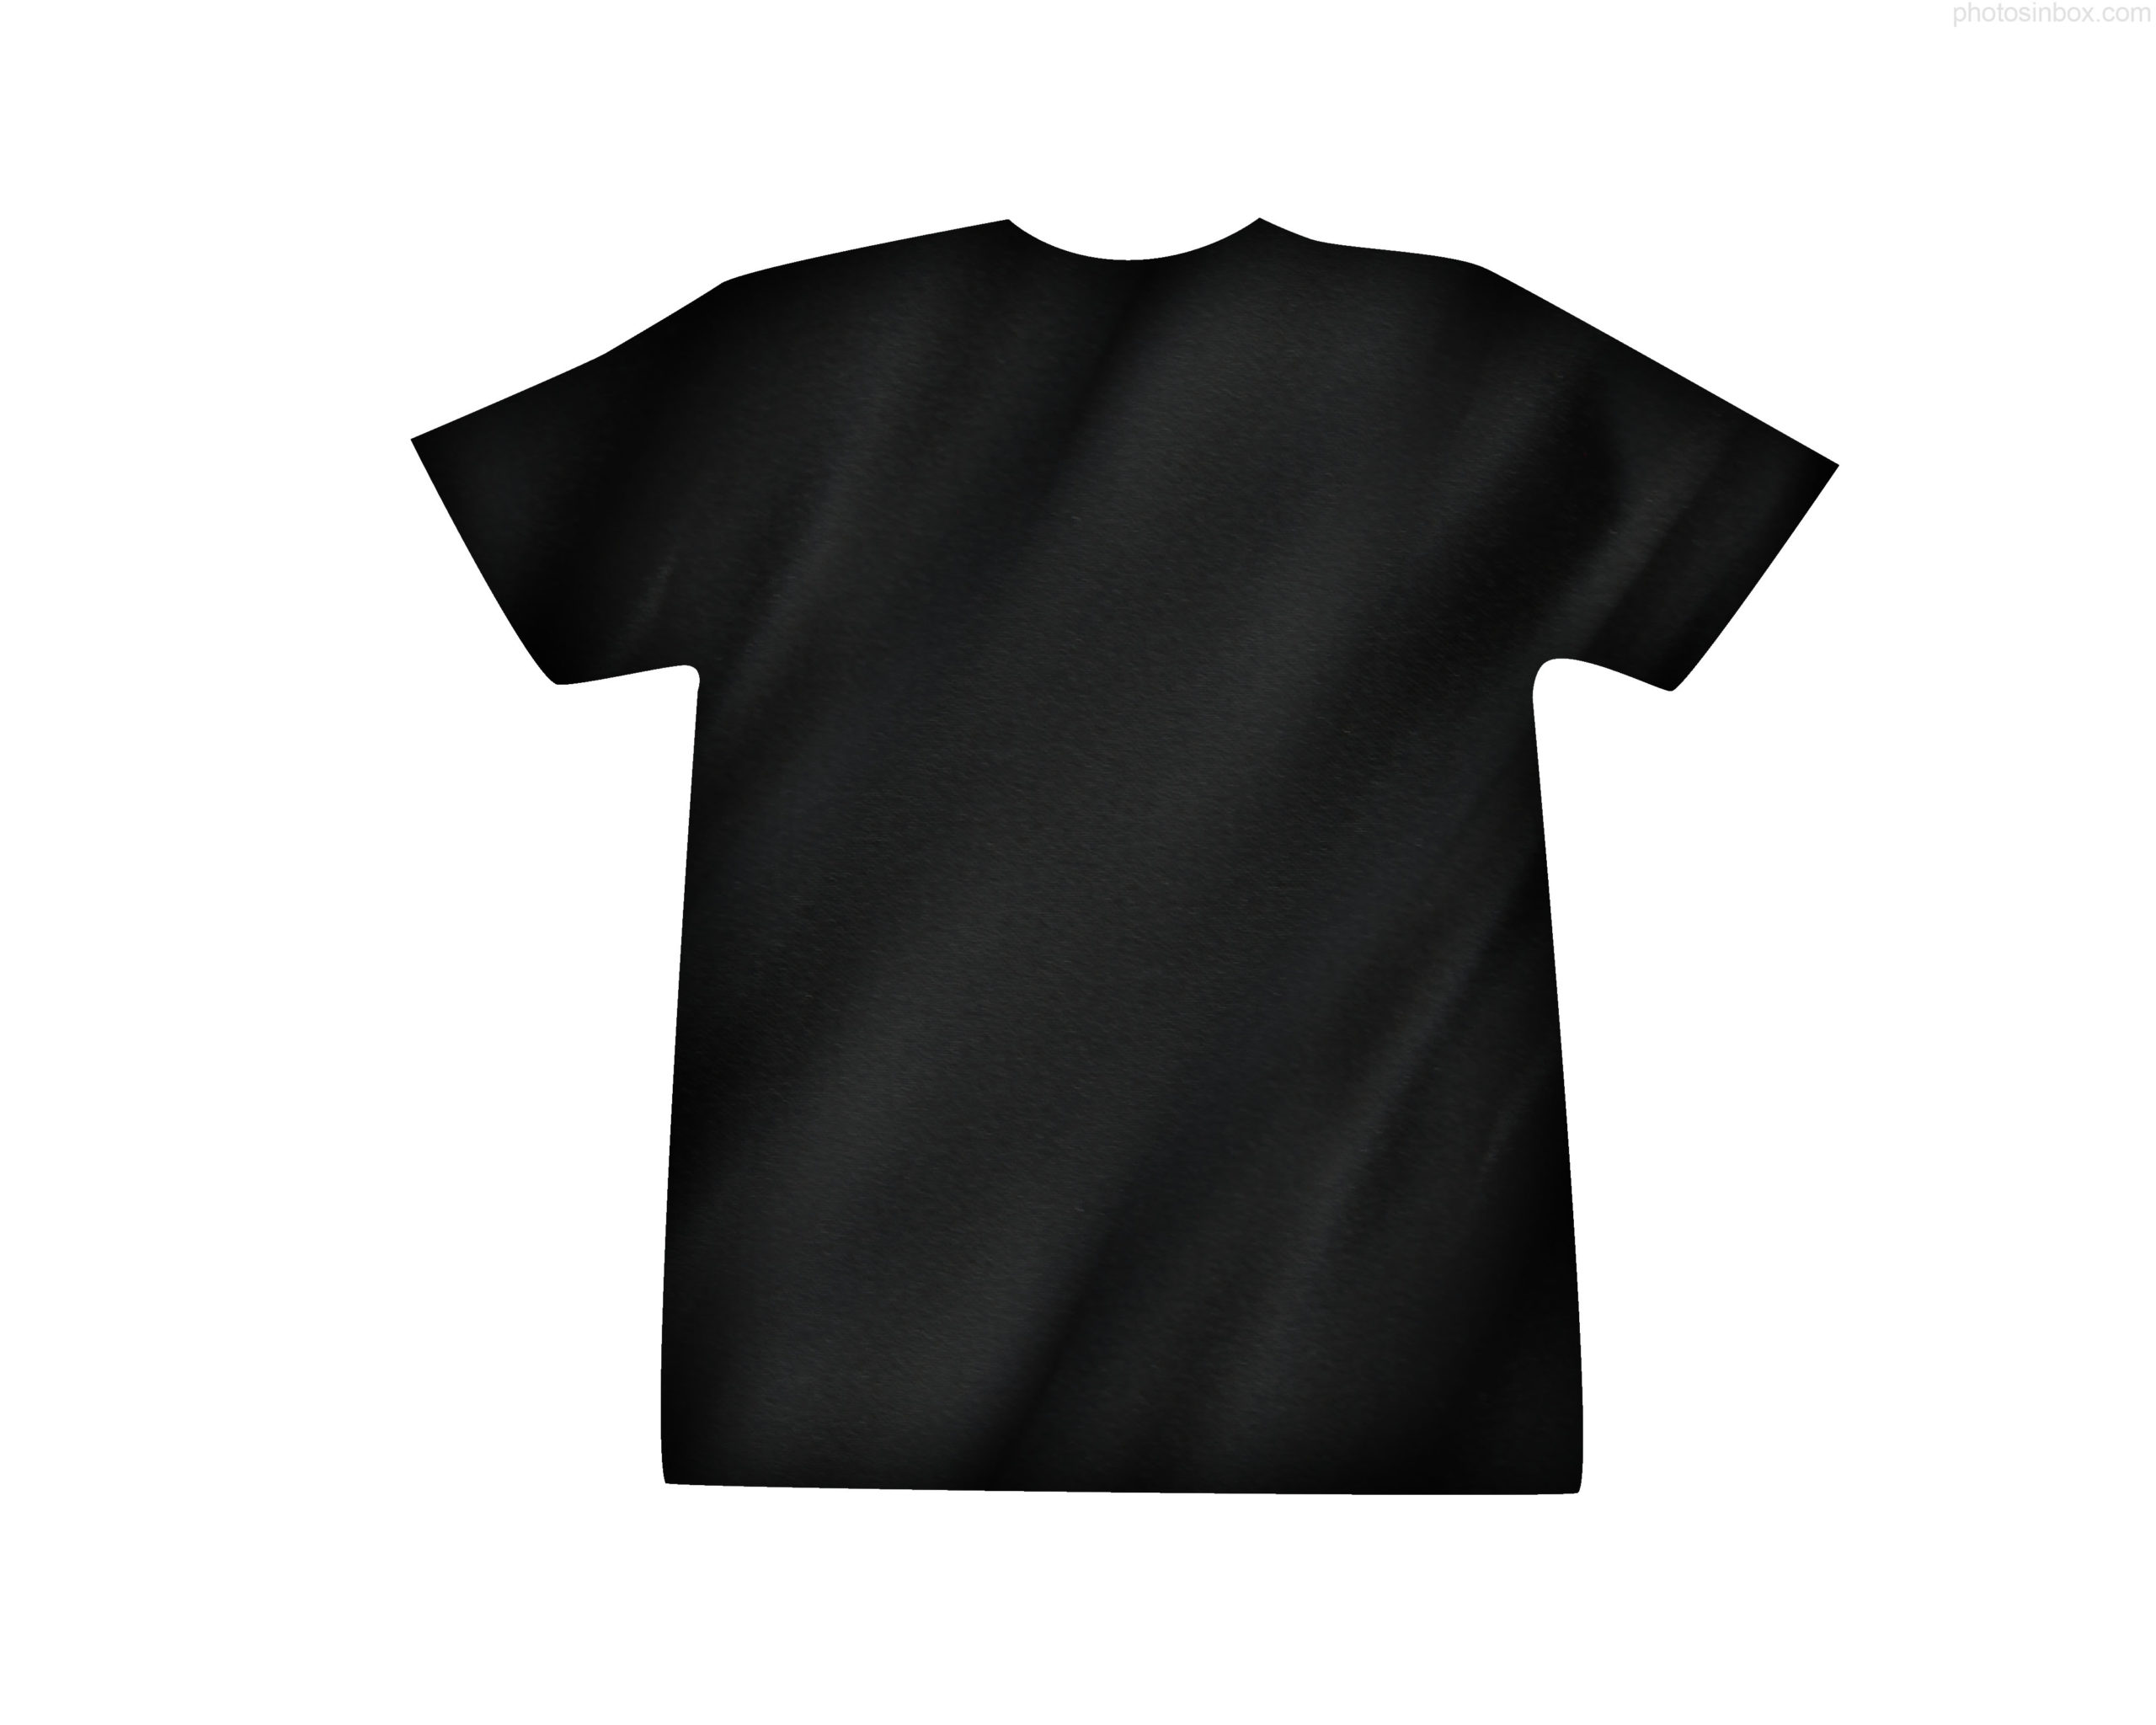 Blank Polo Shirt Template - Cliparts.co regarding Blank T Shirt Outline Template